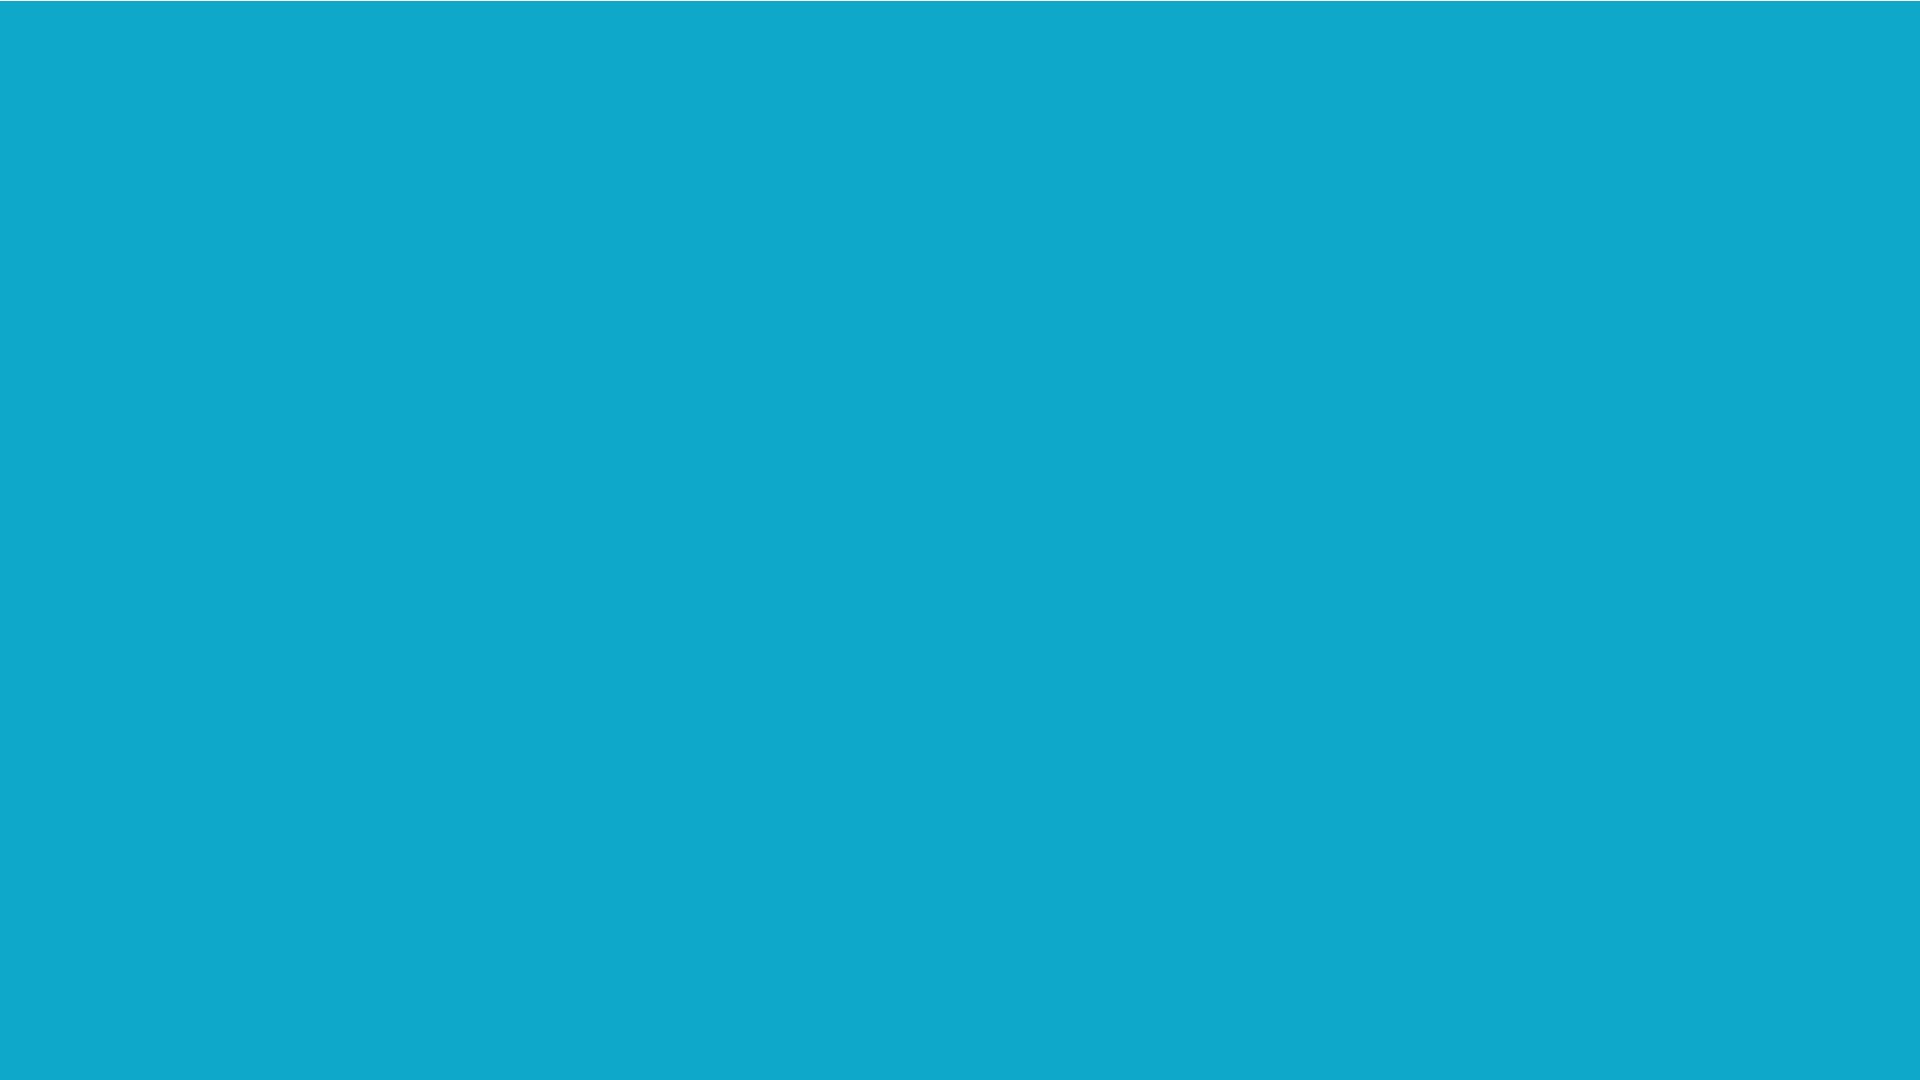 Pacific Blue Solid Color Background